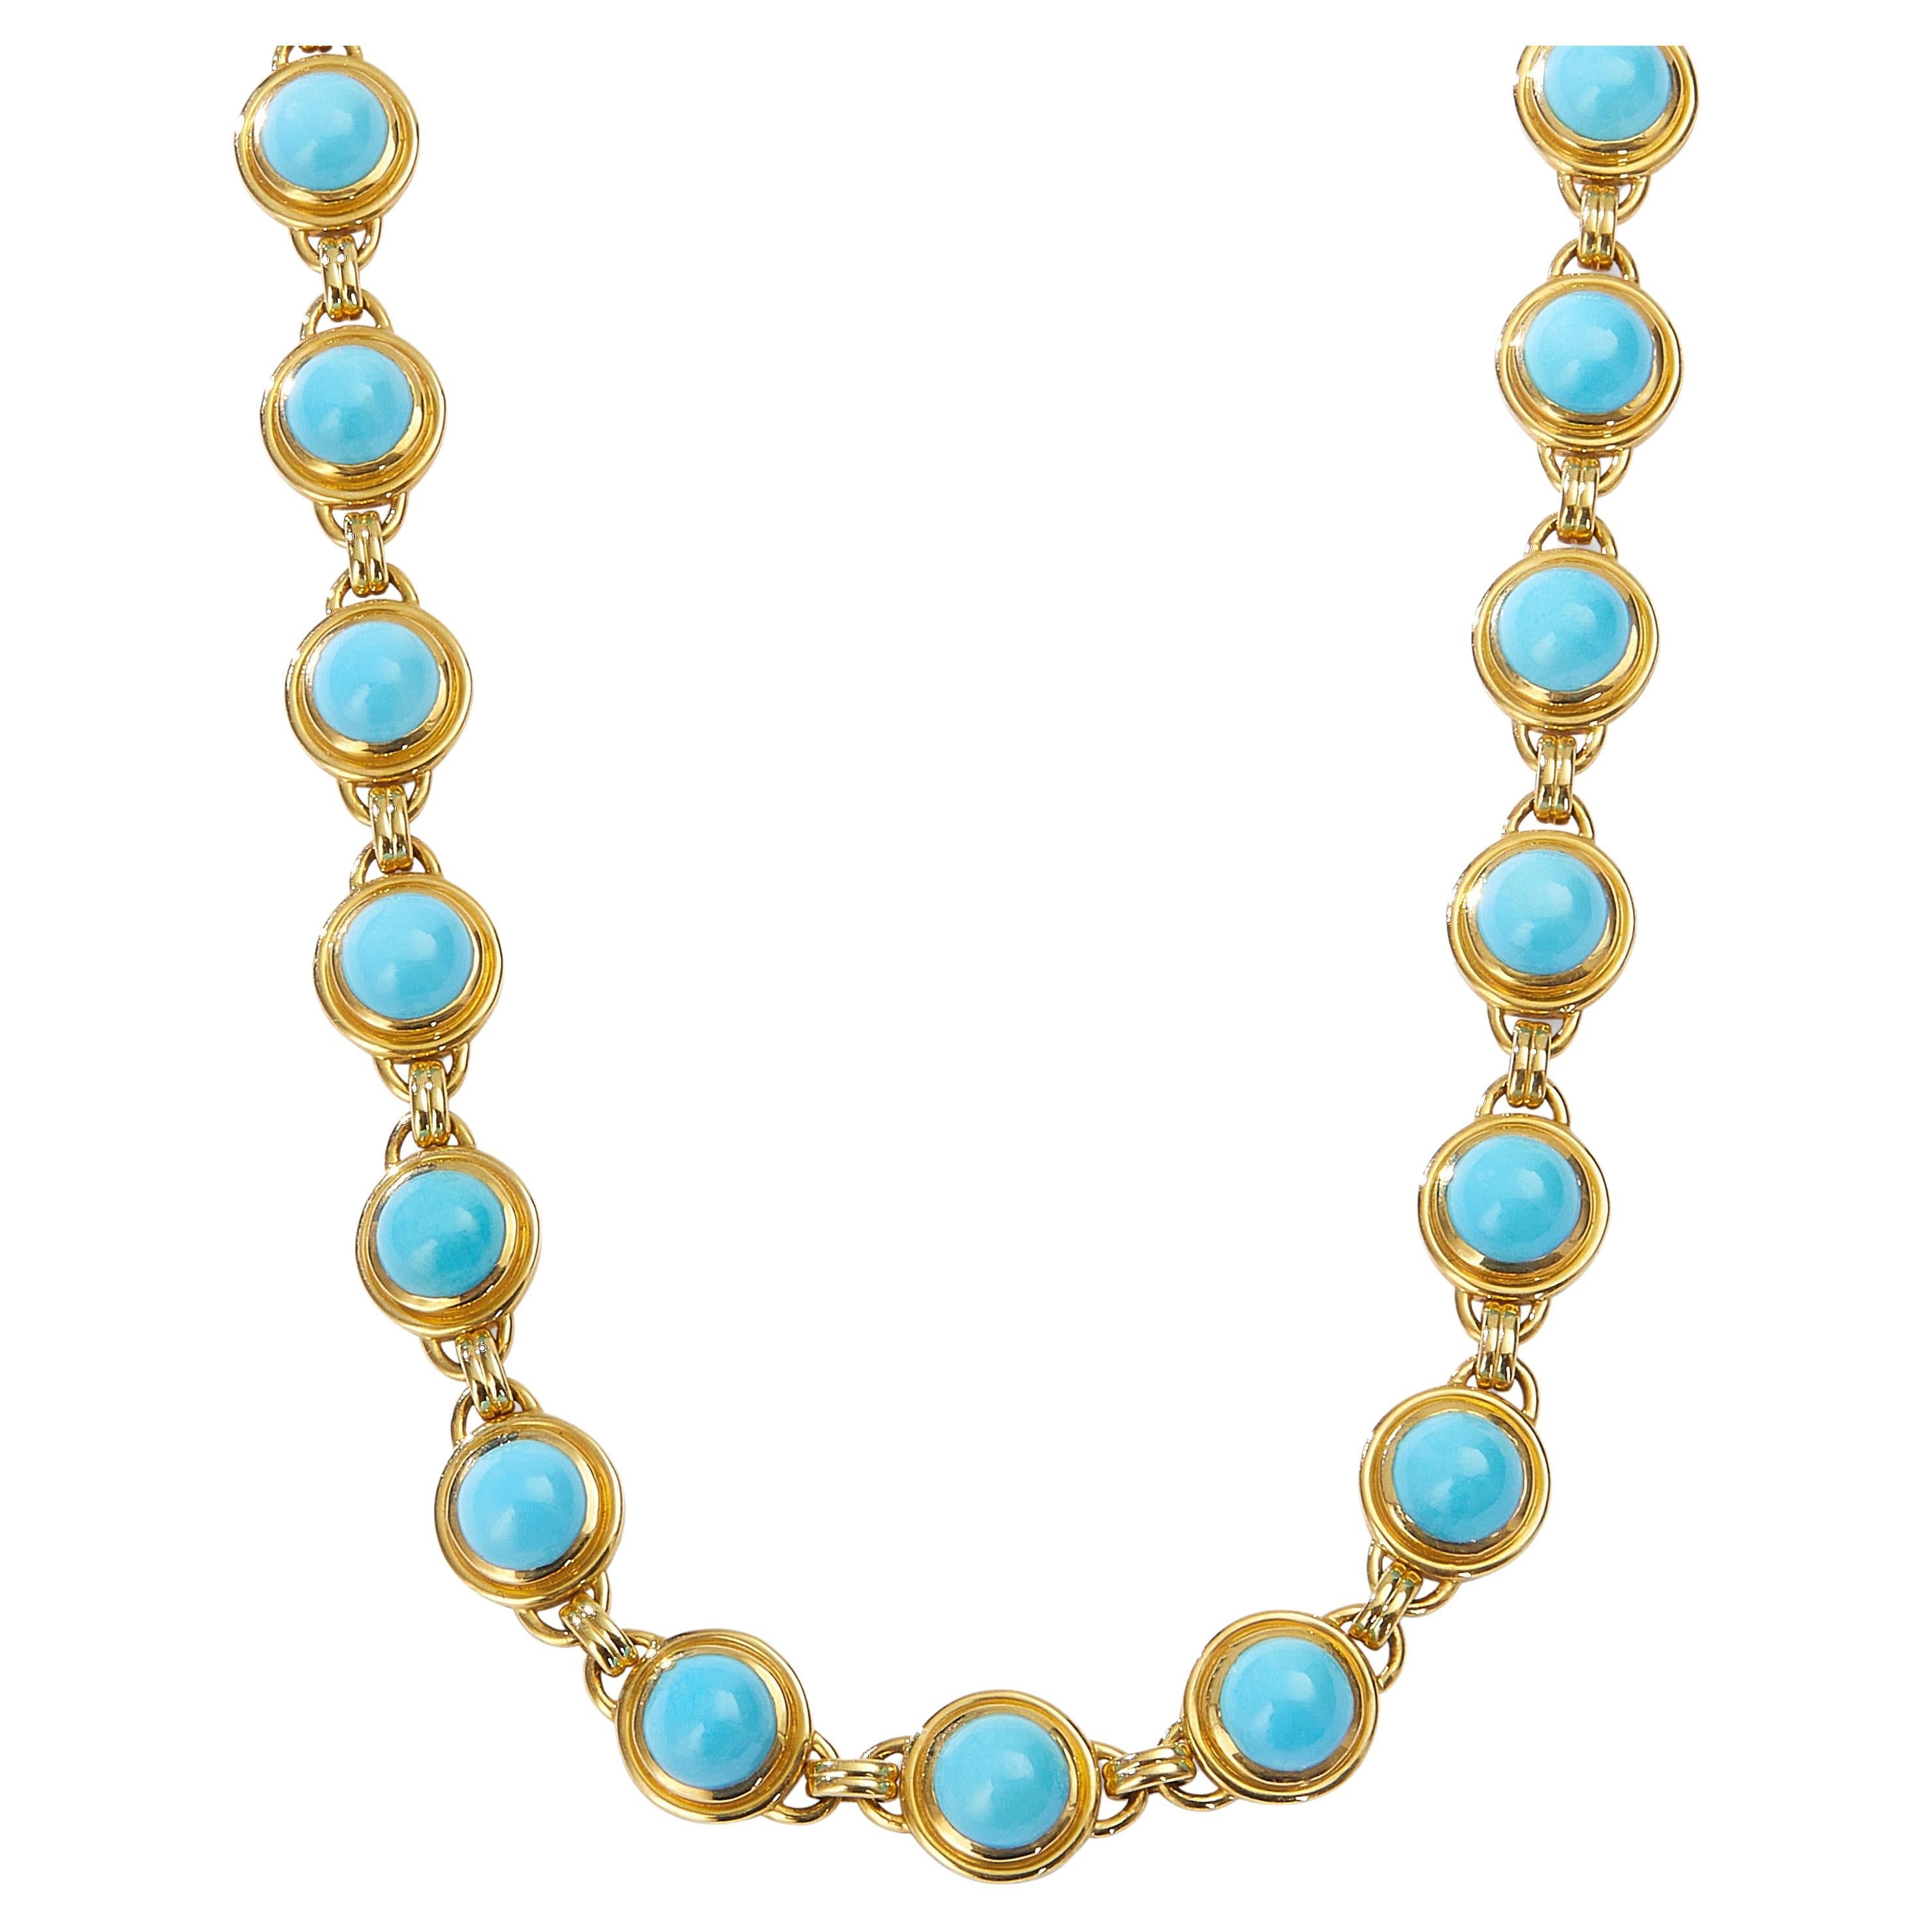 Syna Yellow Gold Necklace with Sleeping Beauty Turquoise